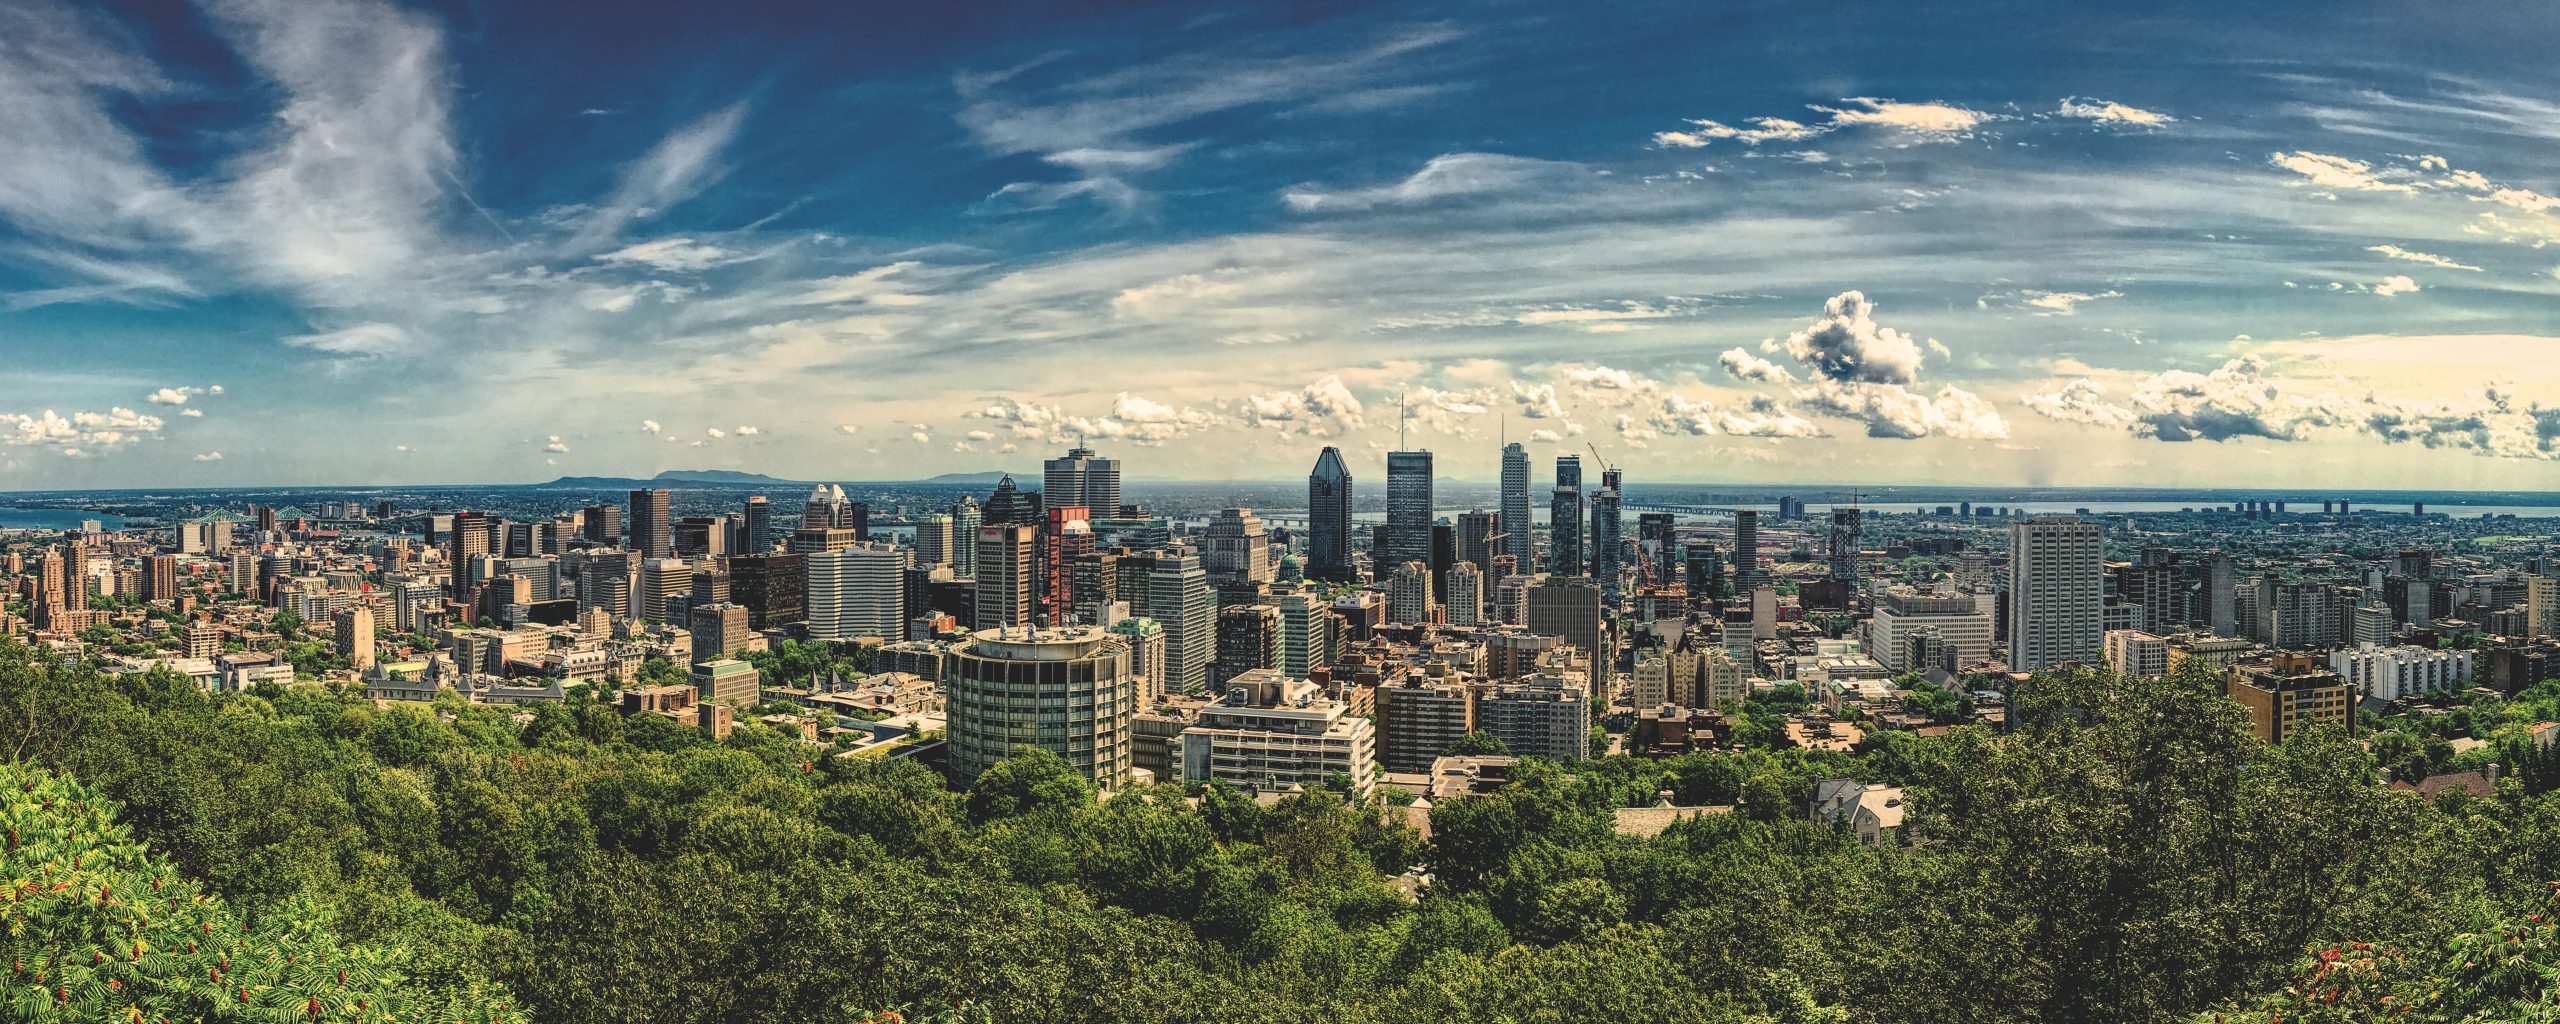 Panoramic view of Montreal, Canada featuring tall buildings and trees. 